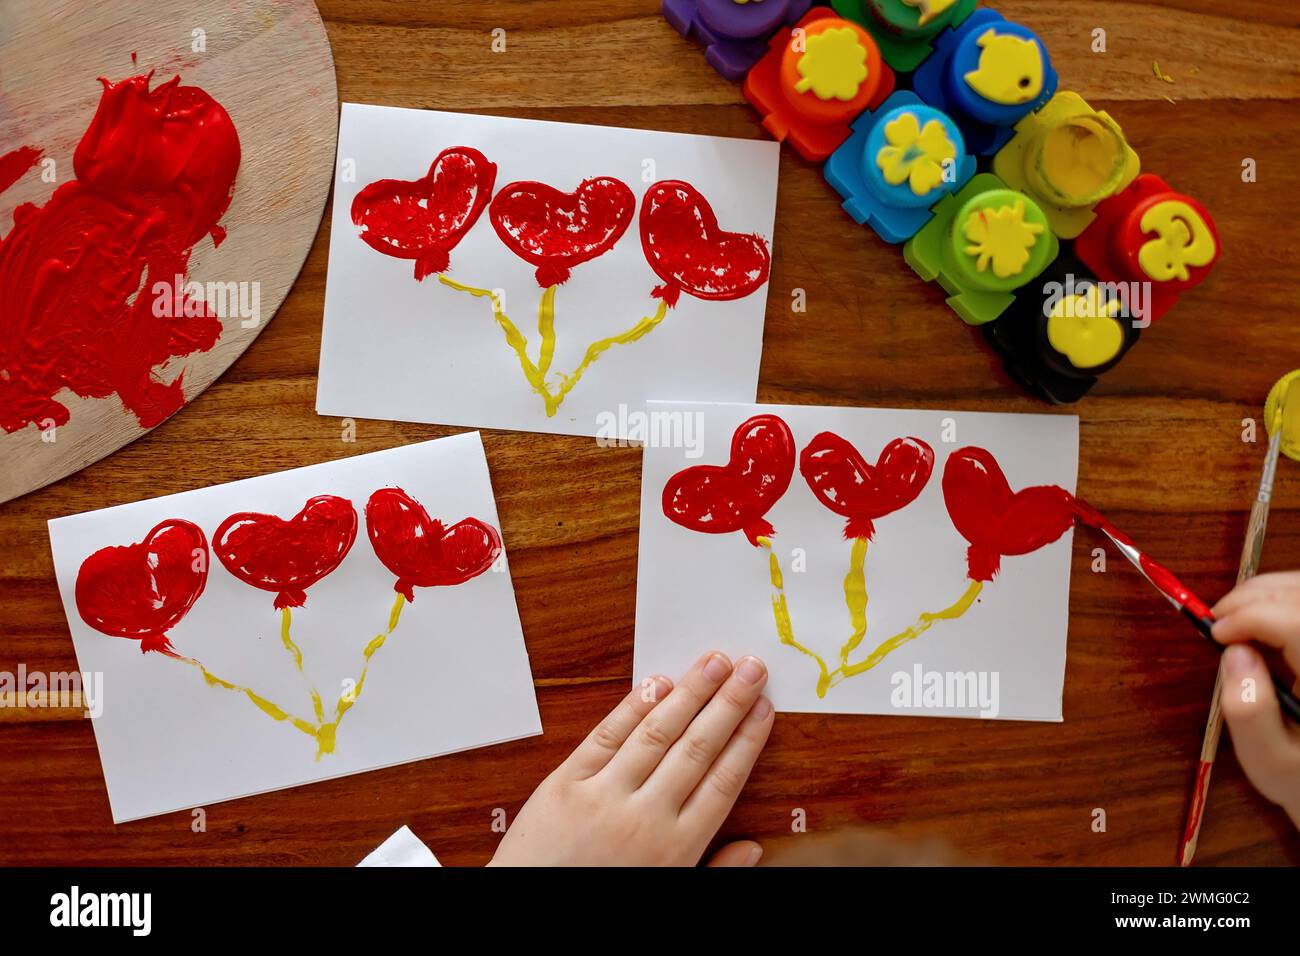 Child, making creative art picture with hearts for Valentine Stock Photo